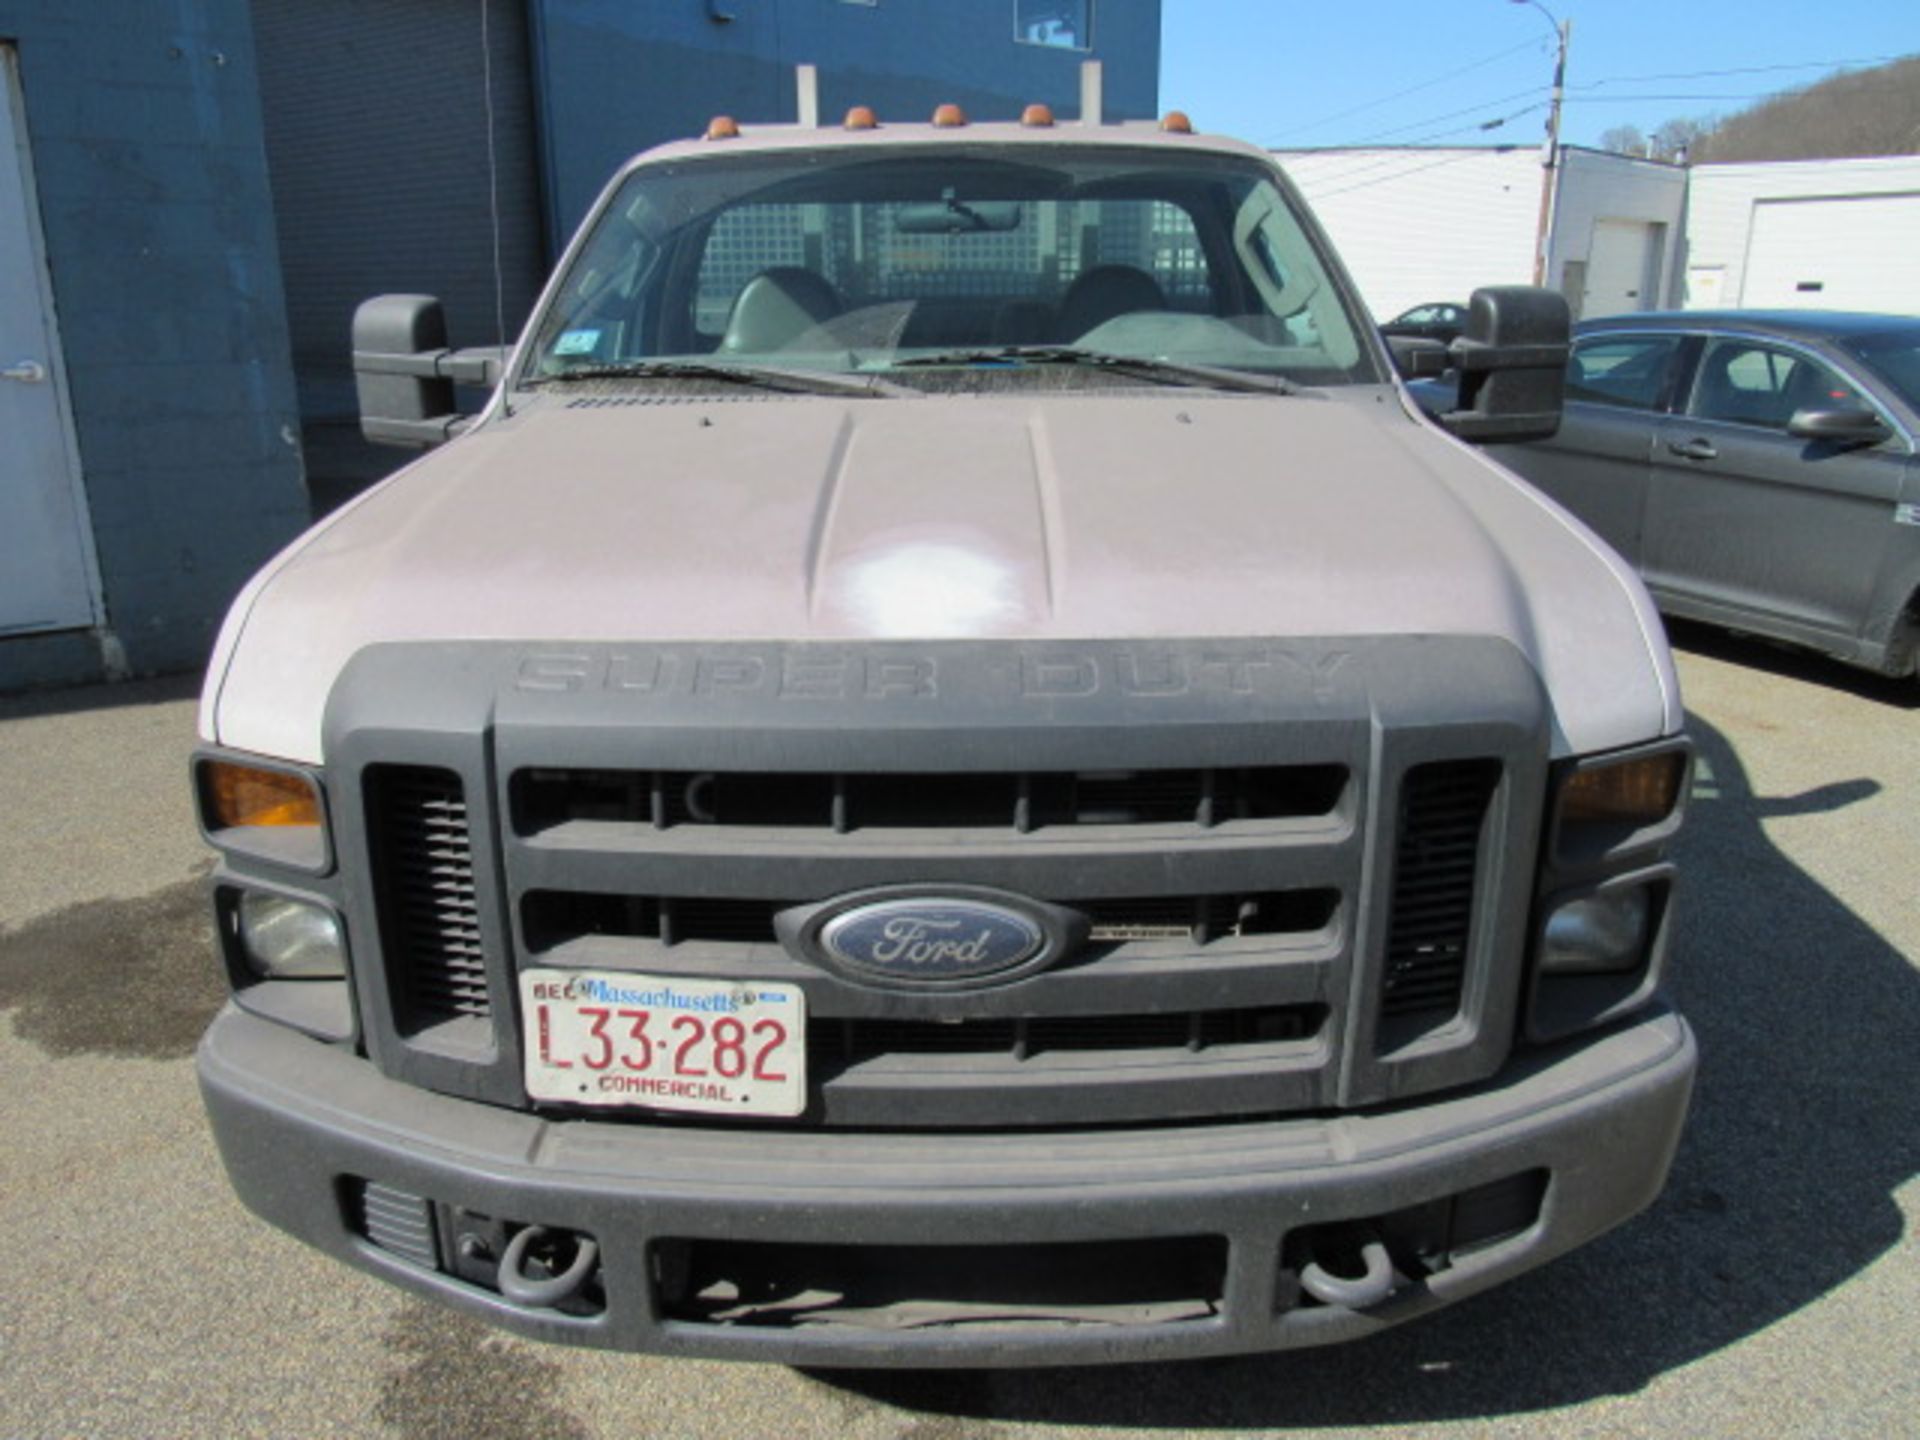 Ford F-350 Automatic Pick-Up Truck - Image 6 of 11